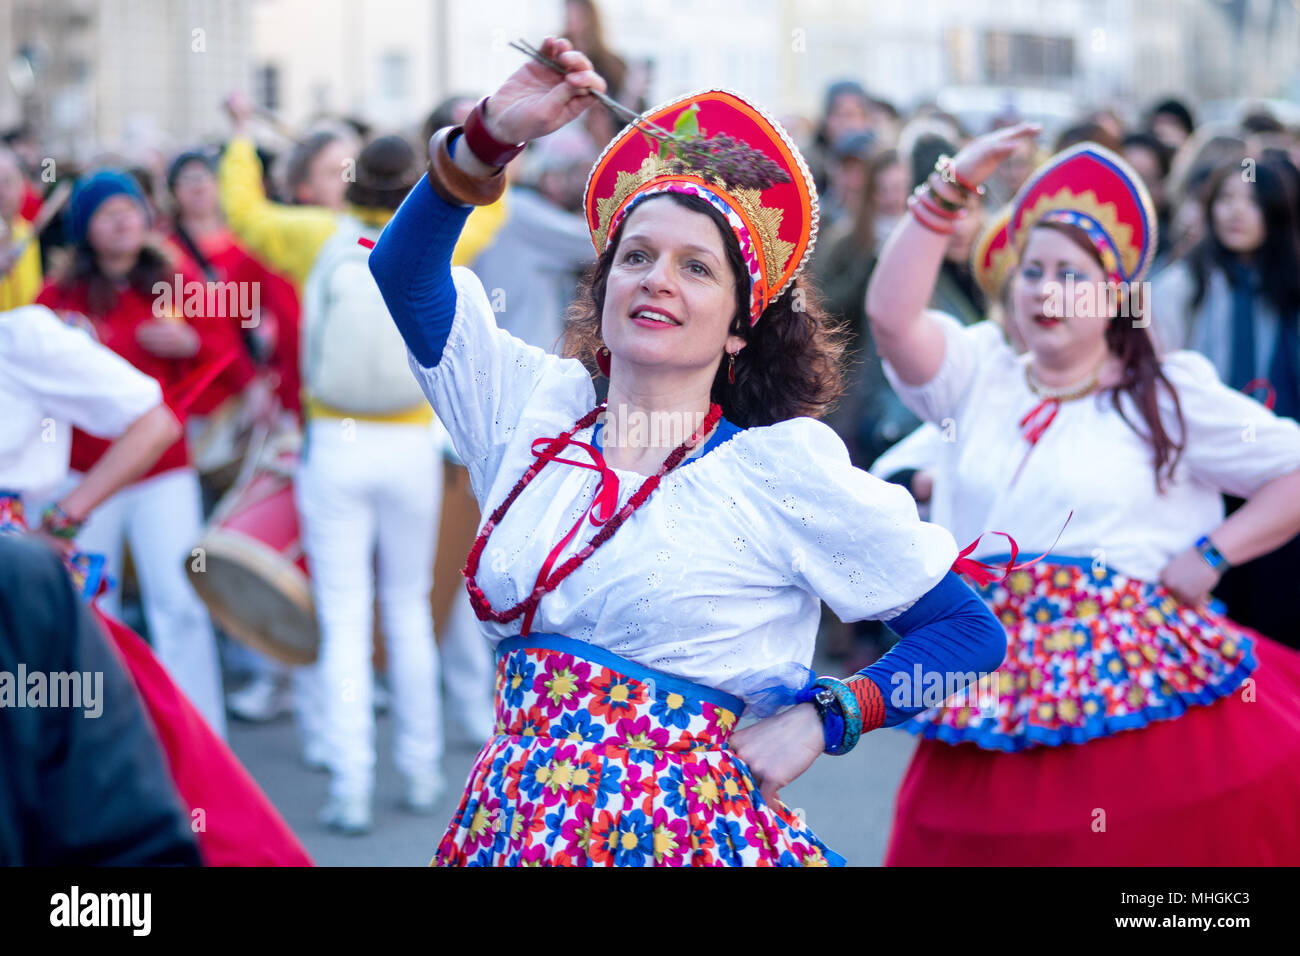 Oxford, UK. 1st May, 2018.  Revellers in Oxford for the annual May Day celebrations. Oxford celebrates May morning with the Magdalen boys choir singing at sunrise. Thousands line the streets to listen to what has become an annual Mayday tradition. Andrew Walmsley/Alamy Live News  Stock Photo